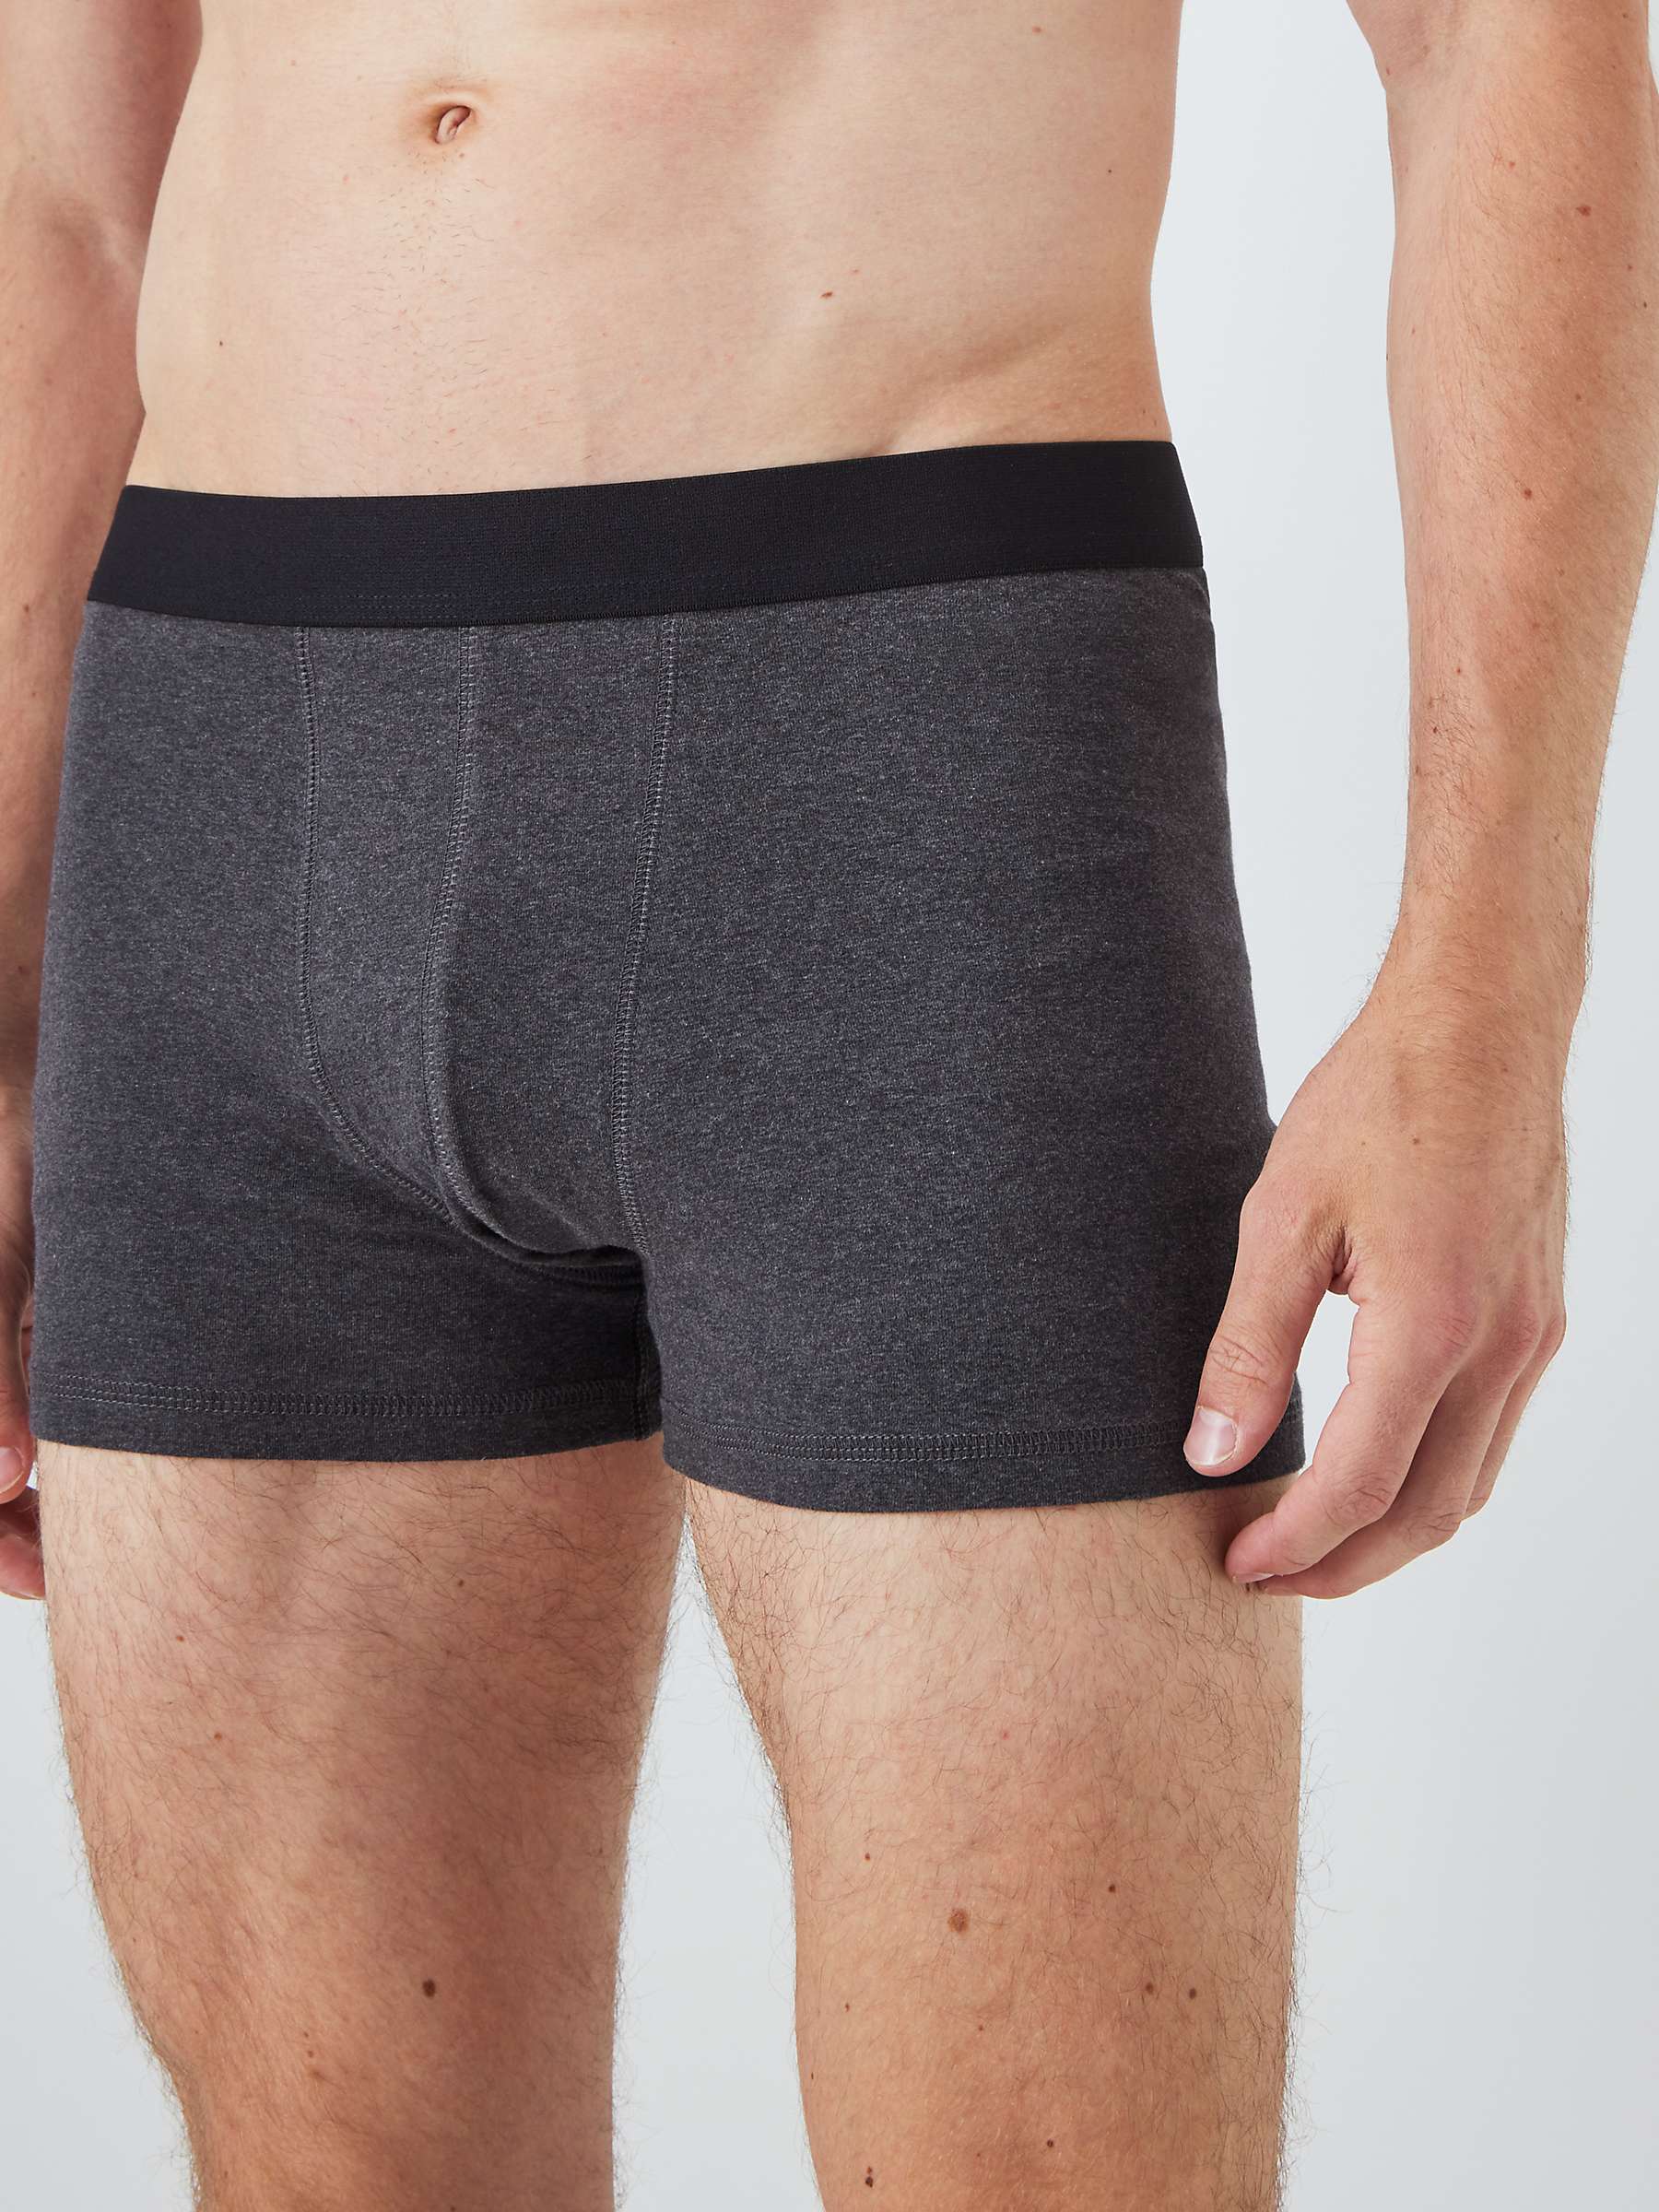 Buy John Lewis ANYDAY Cotton Stretch Trunks, Pack of 5, Black/Grey Online at johnlewis.com